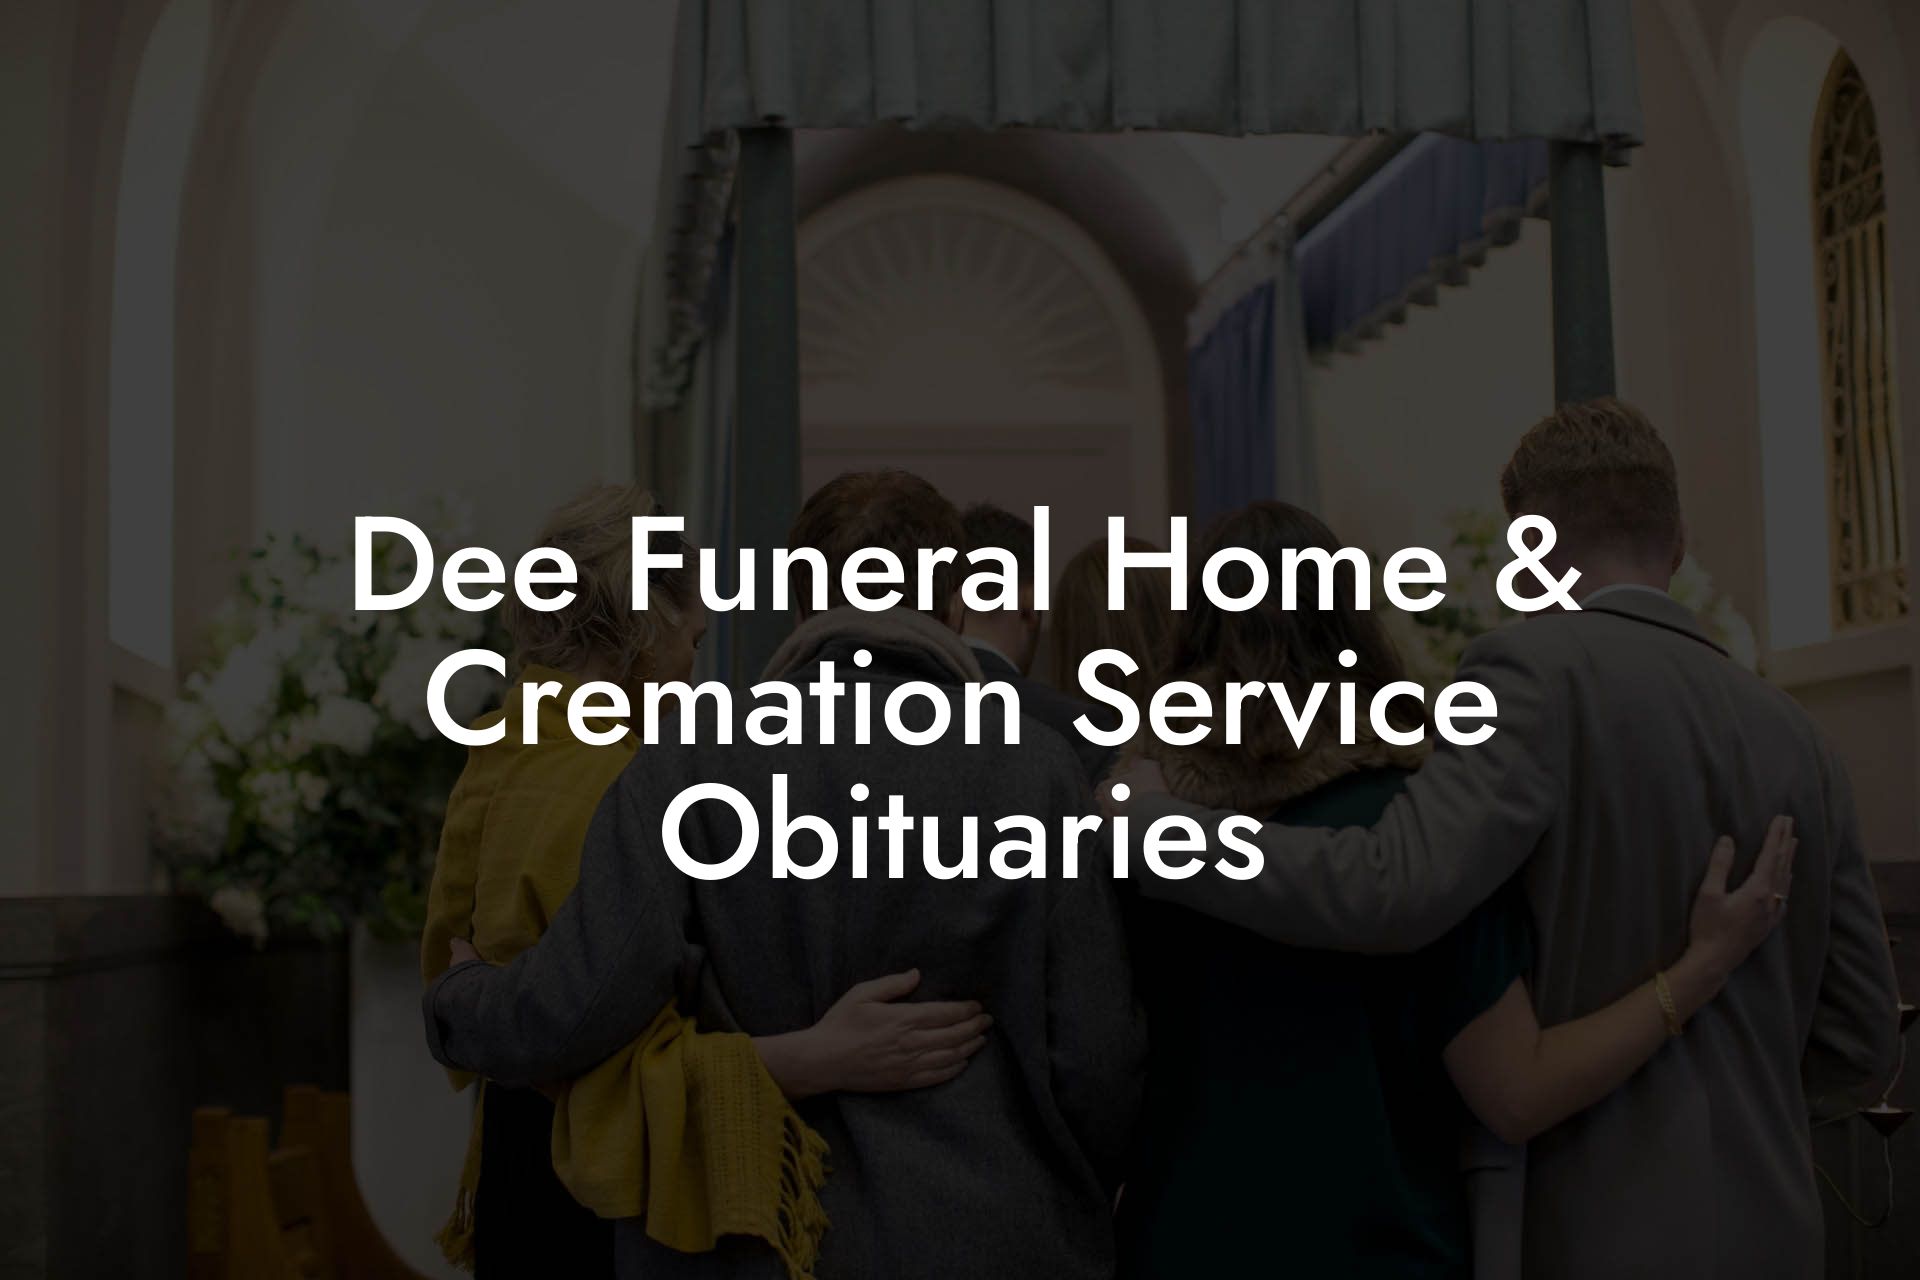 Dee Funeral Home & Cremation Service Obituaries